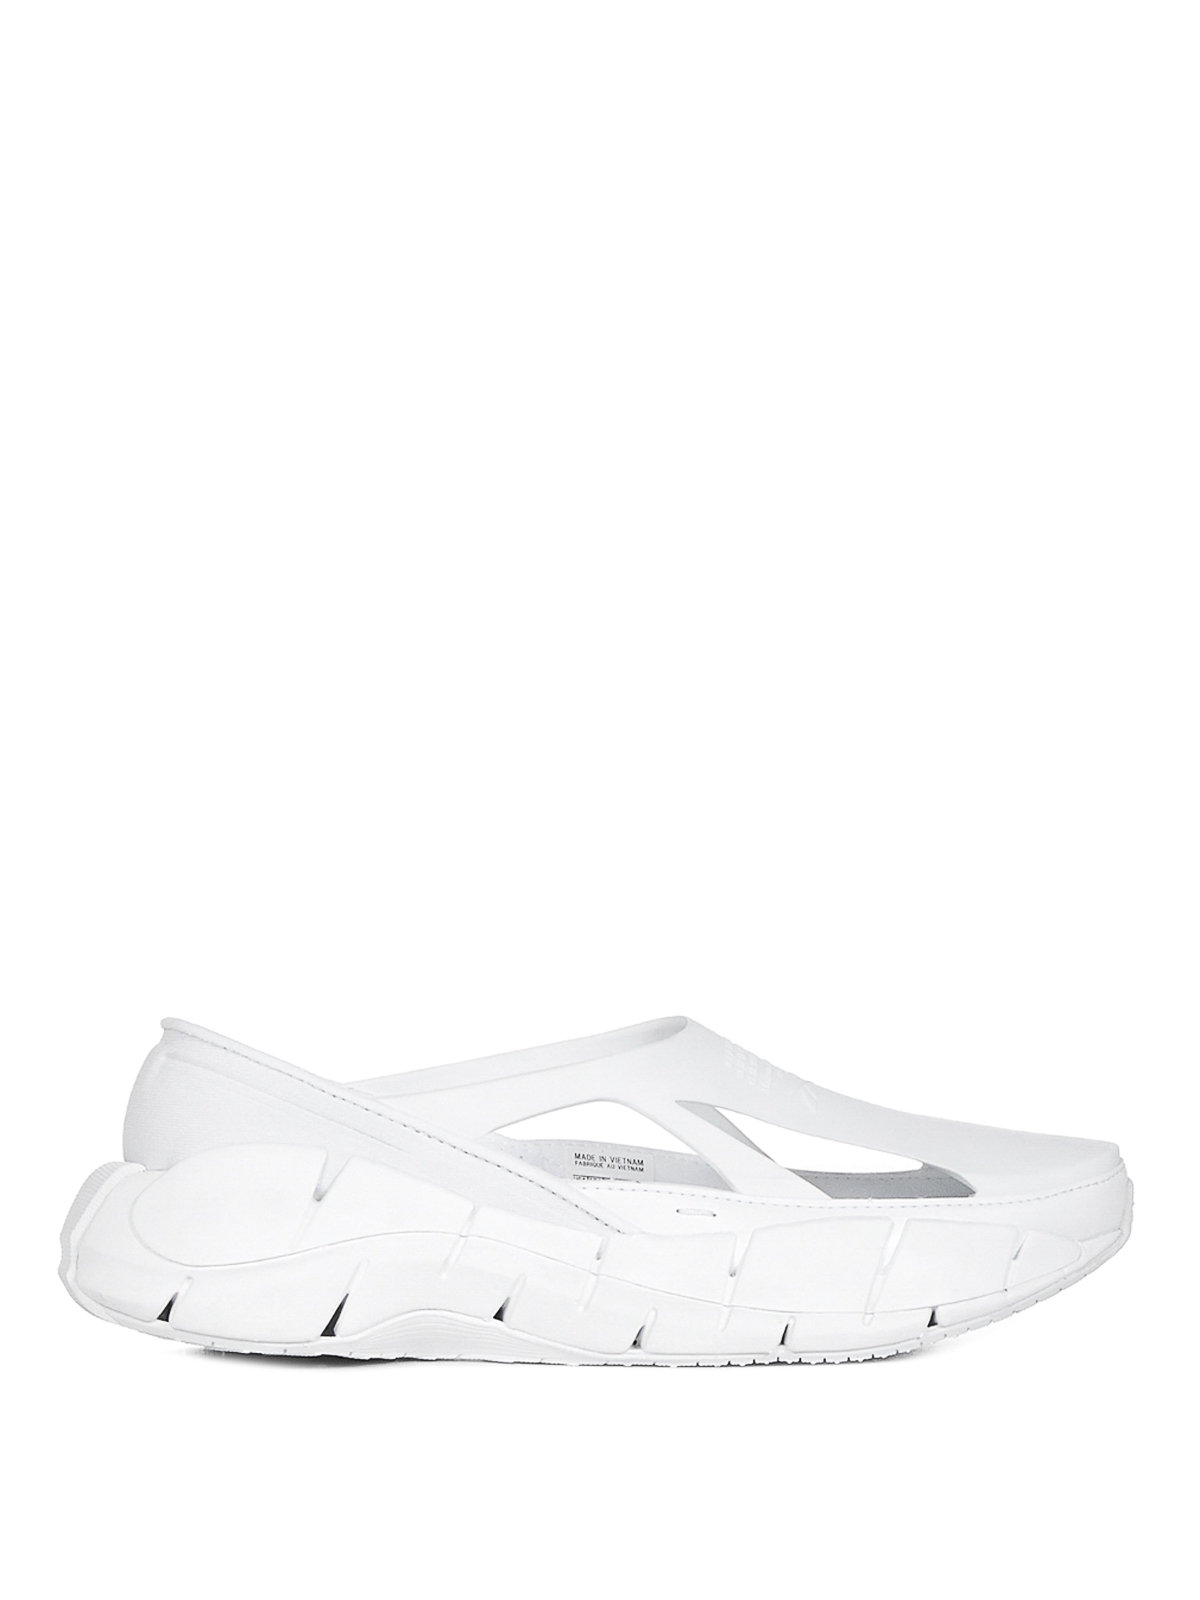 Maison Margiela Fabric Sneakers In White